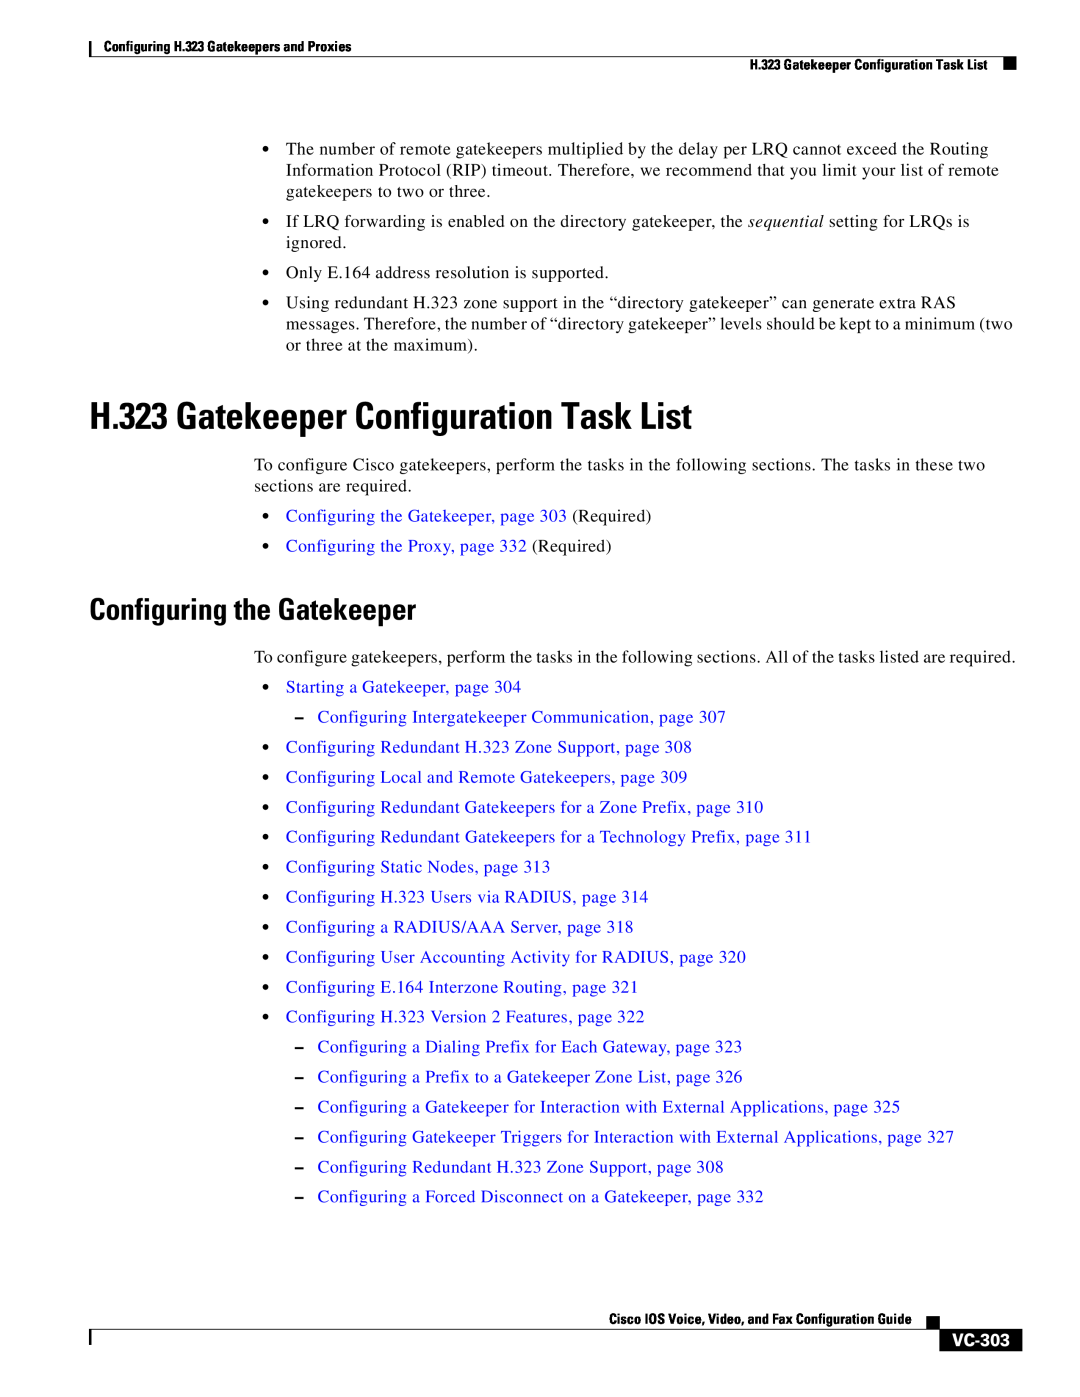 Cisco Systems VC-289 H.323 Gatekeeper Configuration Task List, Configuring the Gatekeeper, Starting a Gatekeeper, page 